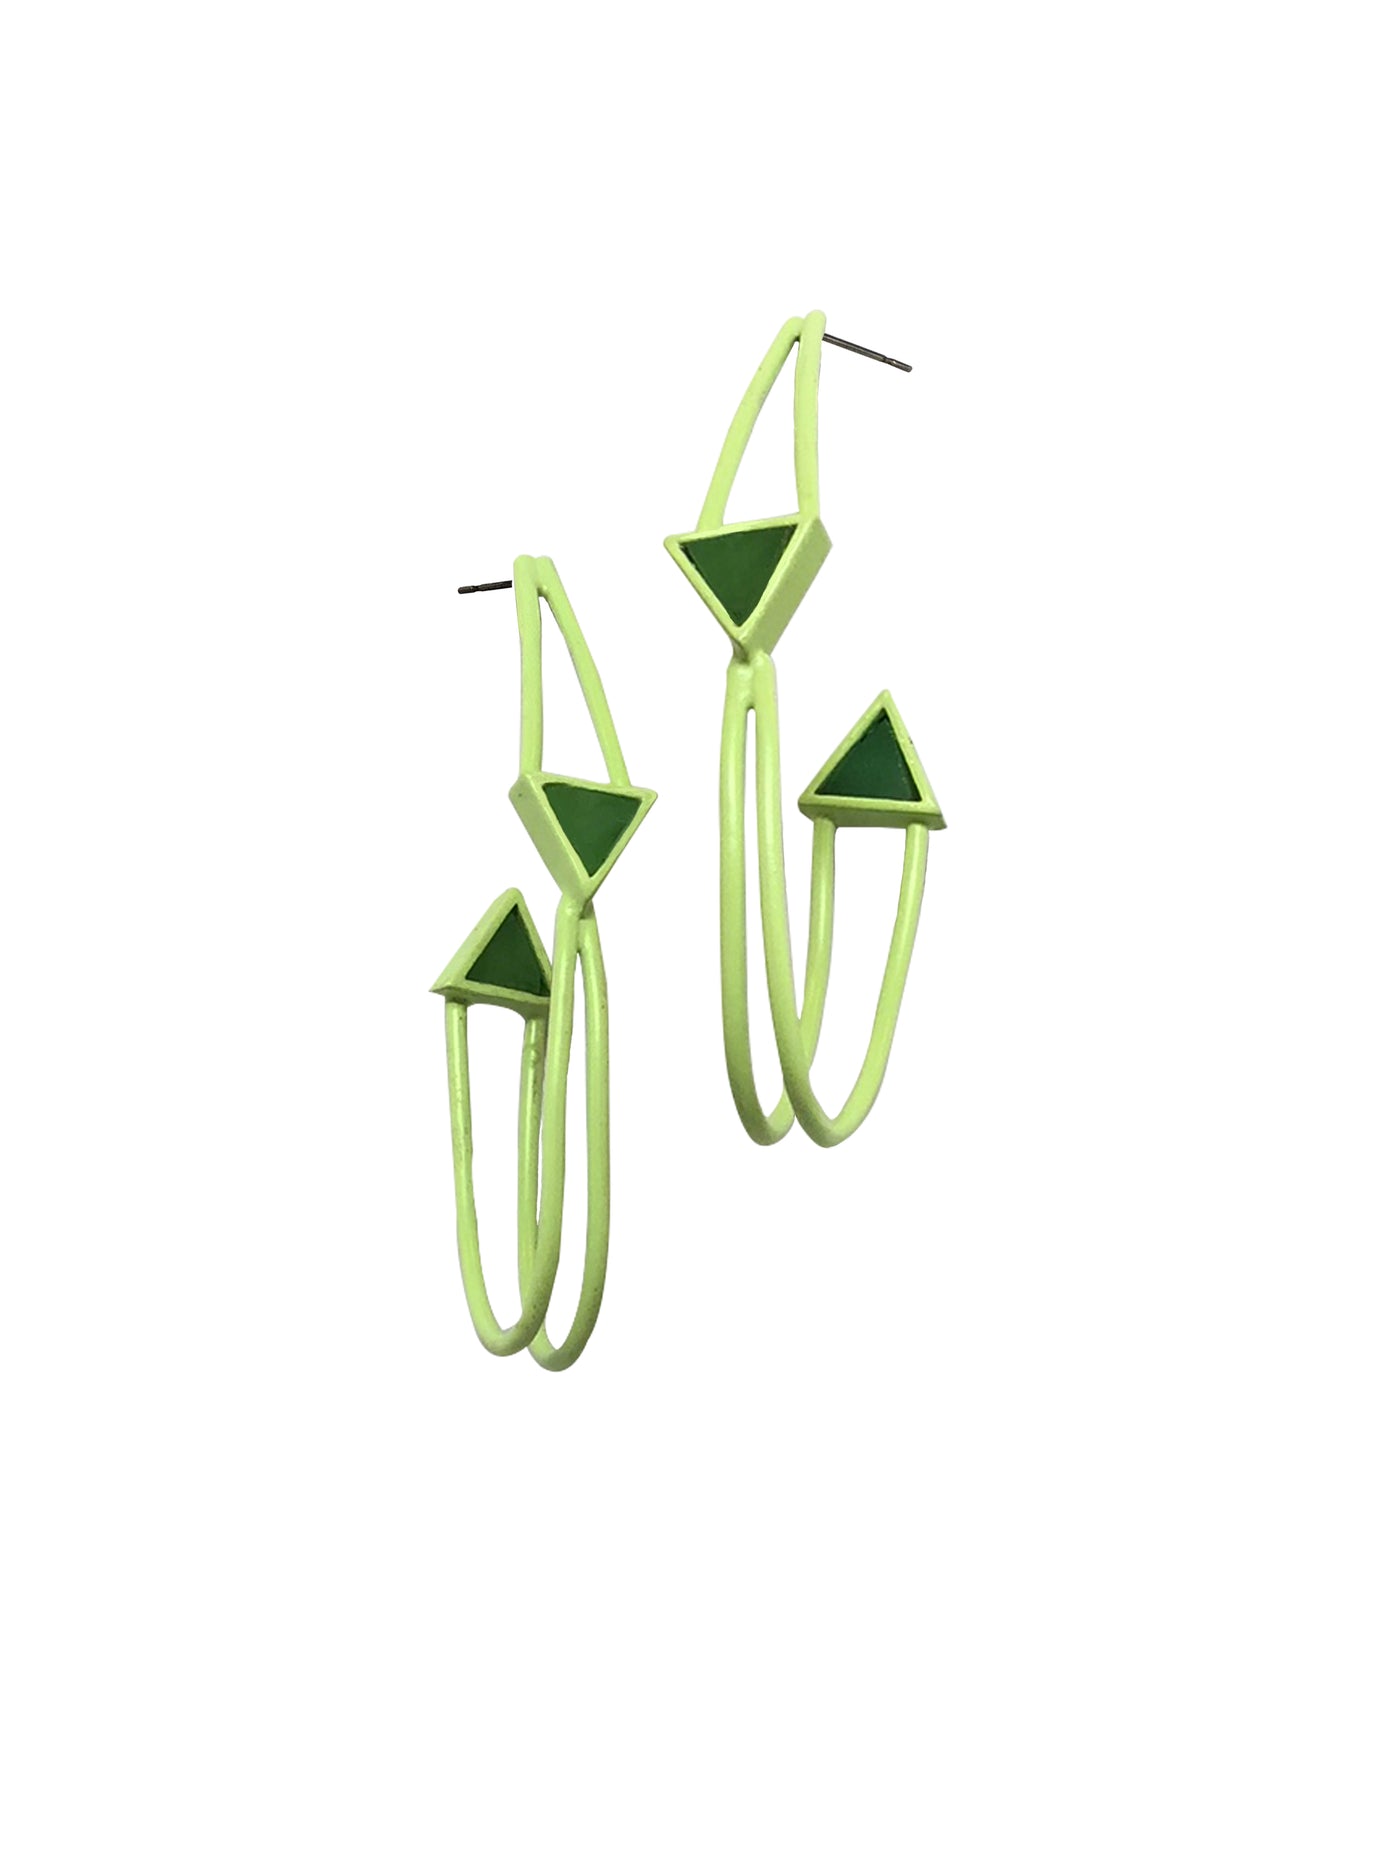 upcycled light Green hoop earrings features a triangle glass in the front and the back.